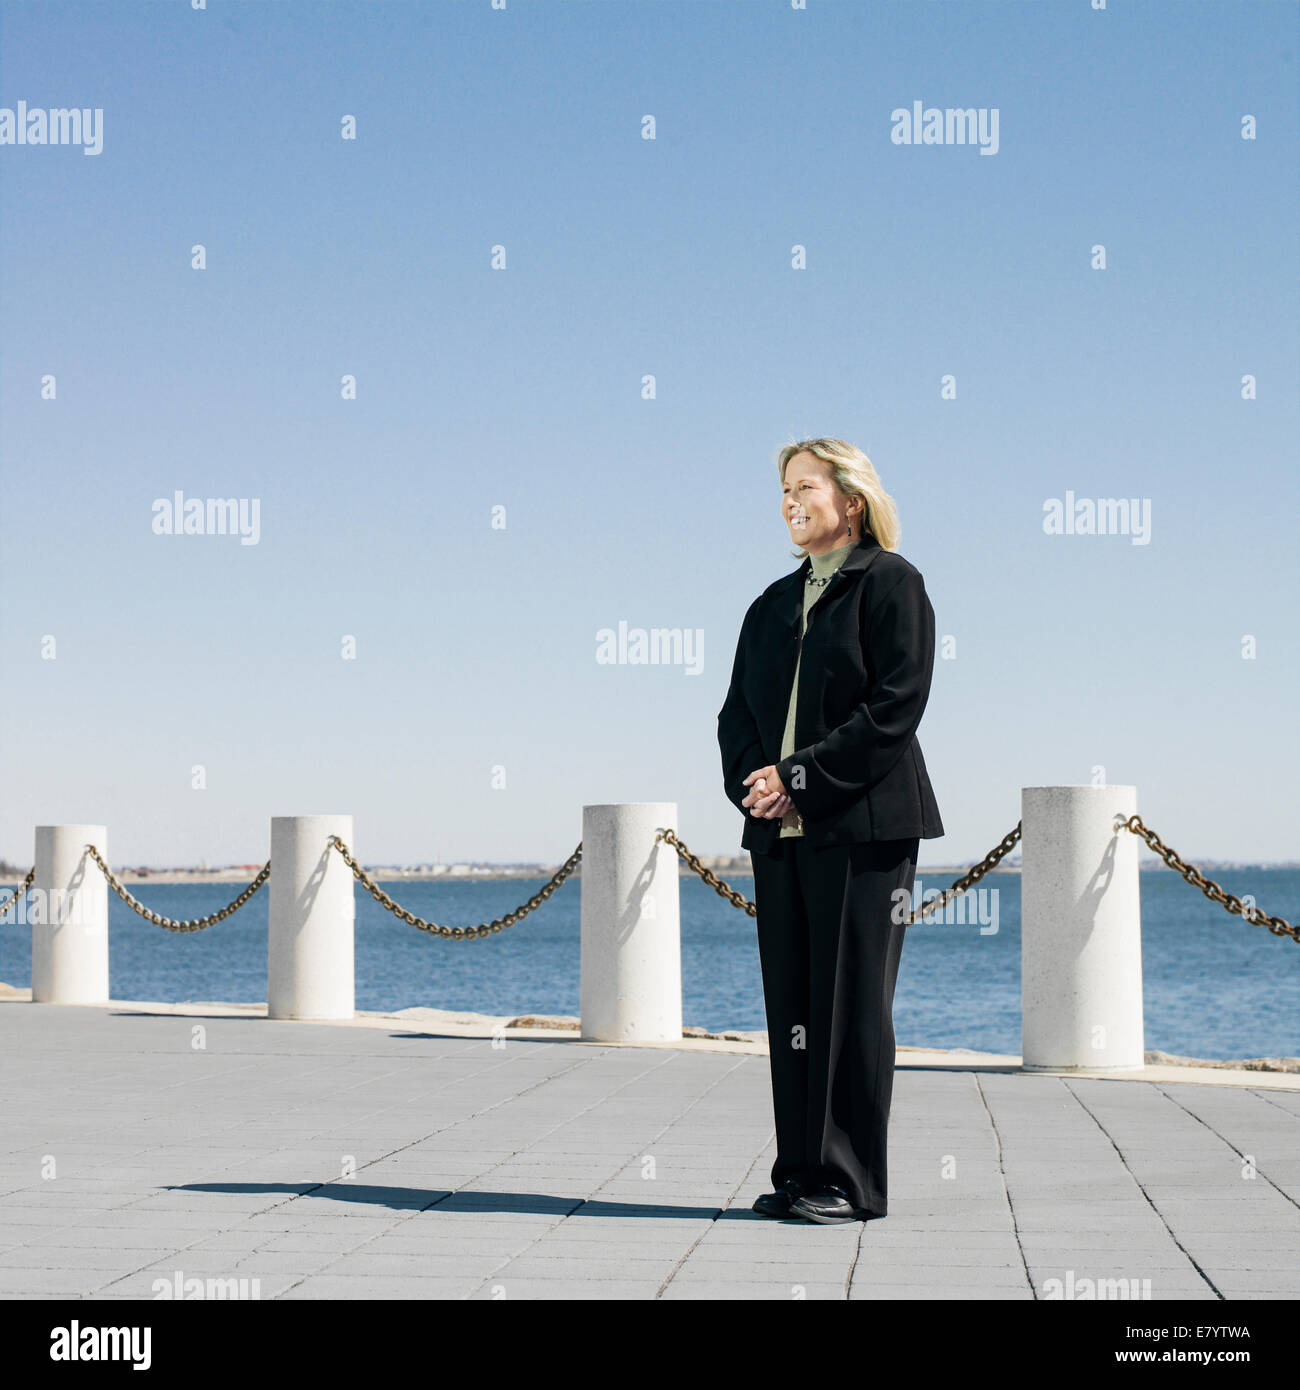 Middle-aged woman on seafront promenade Stock Photo